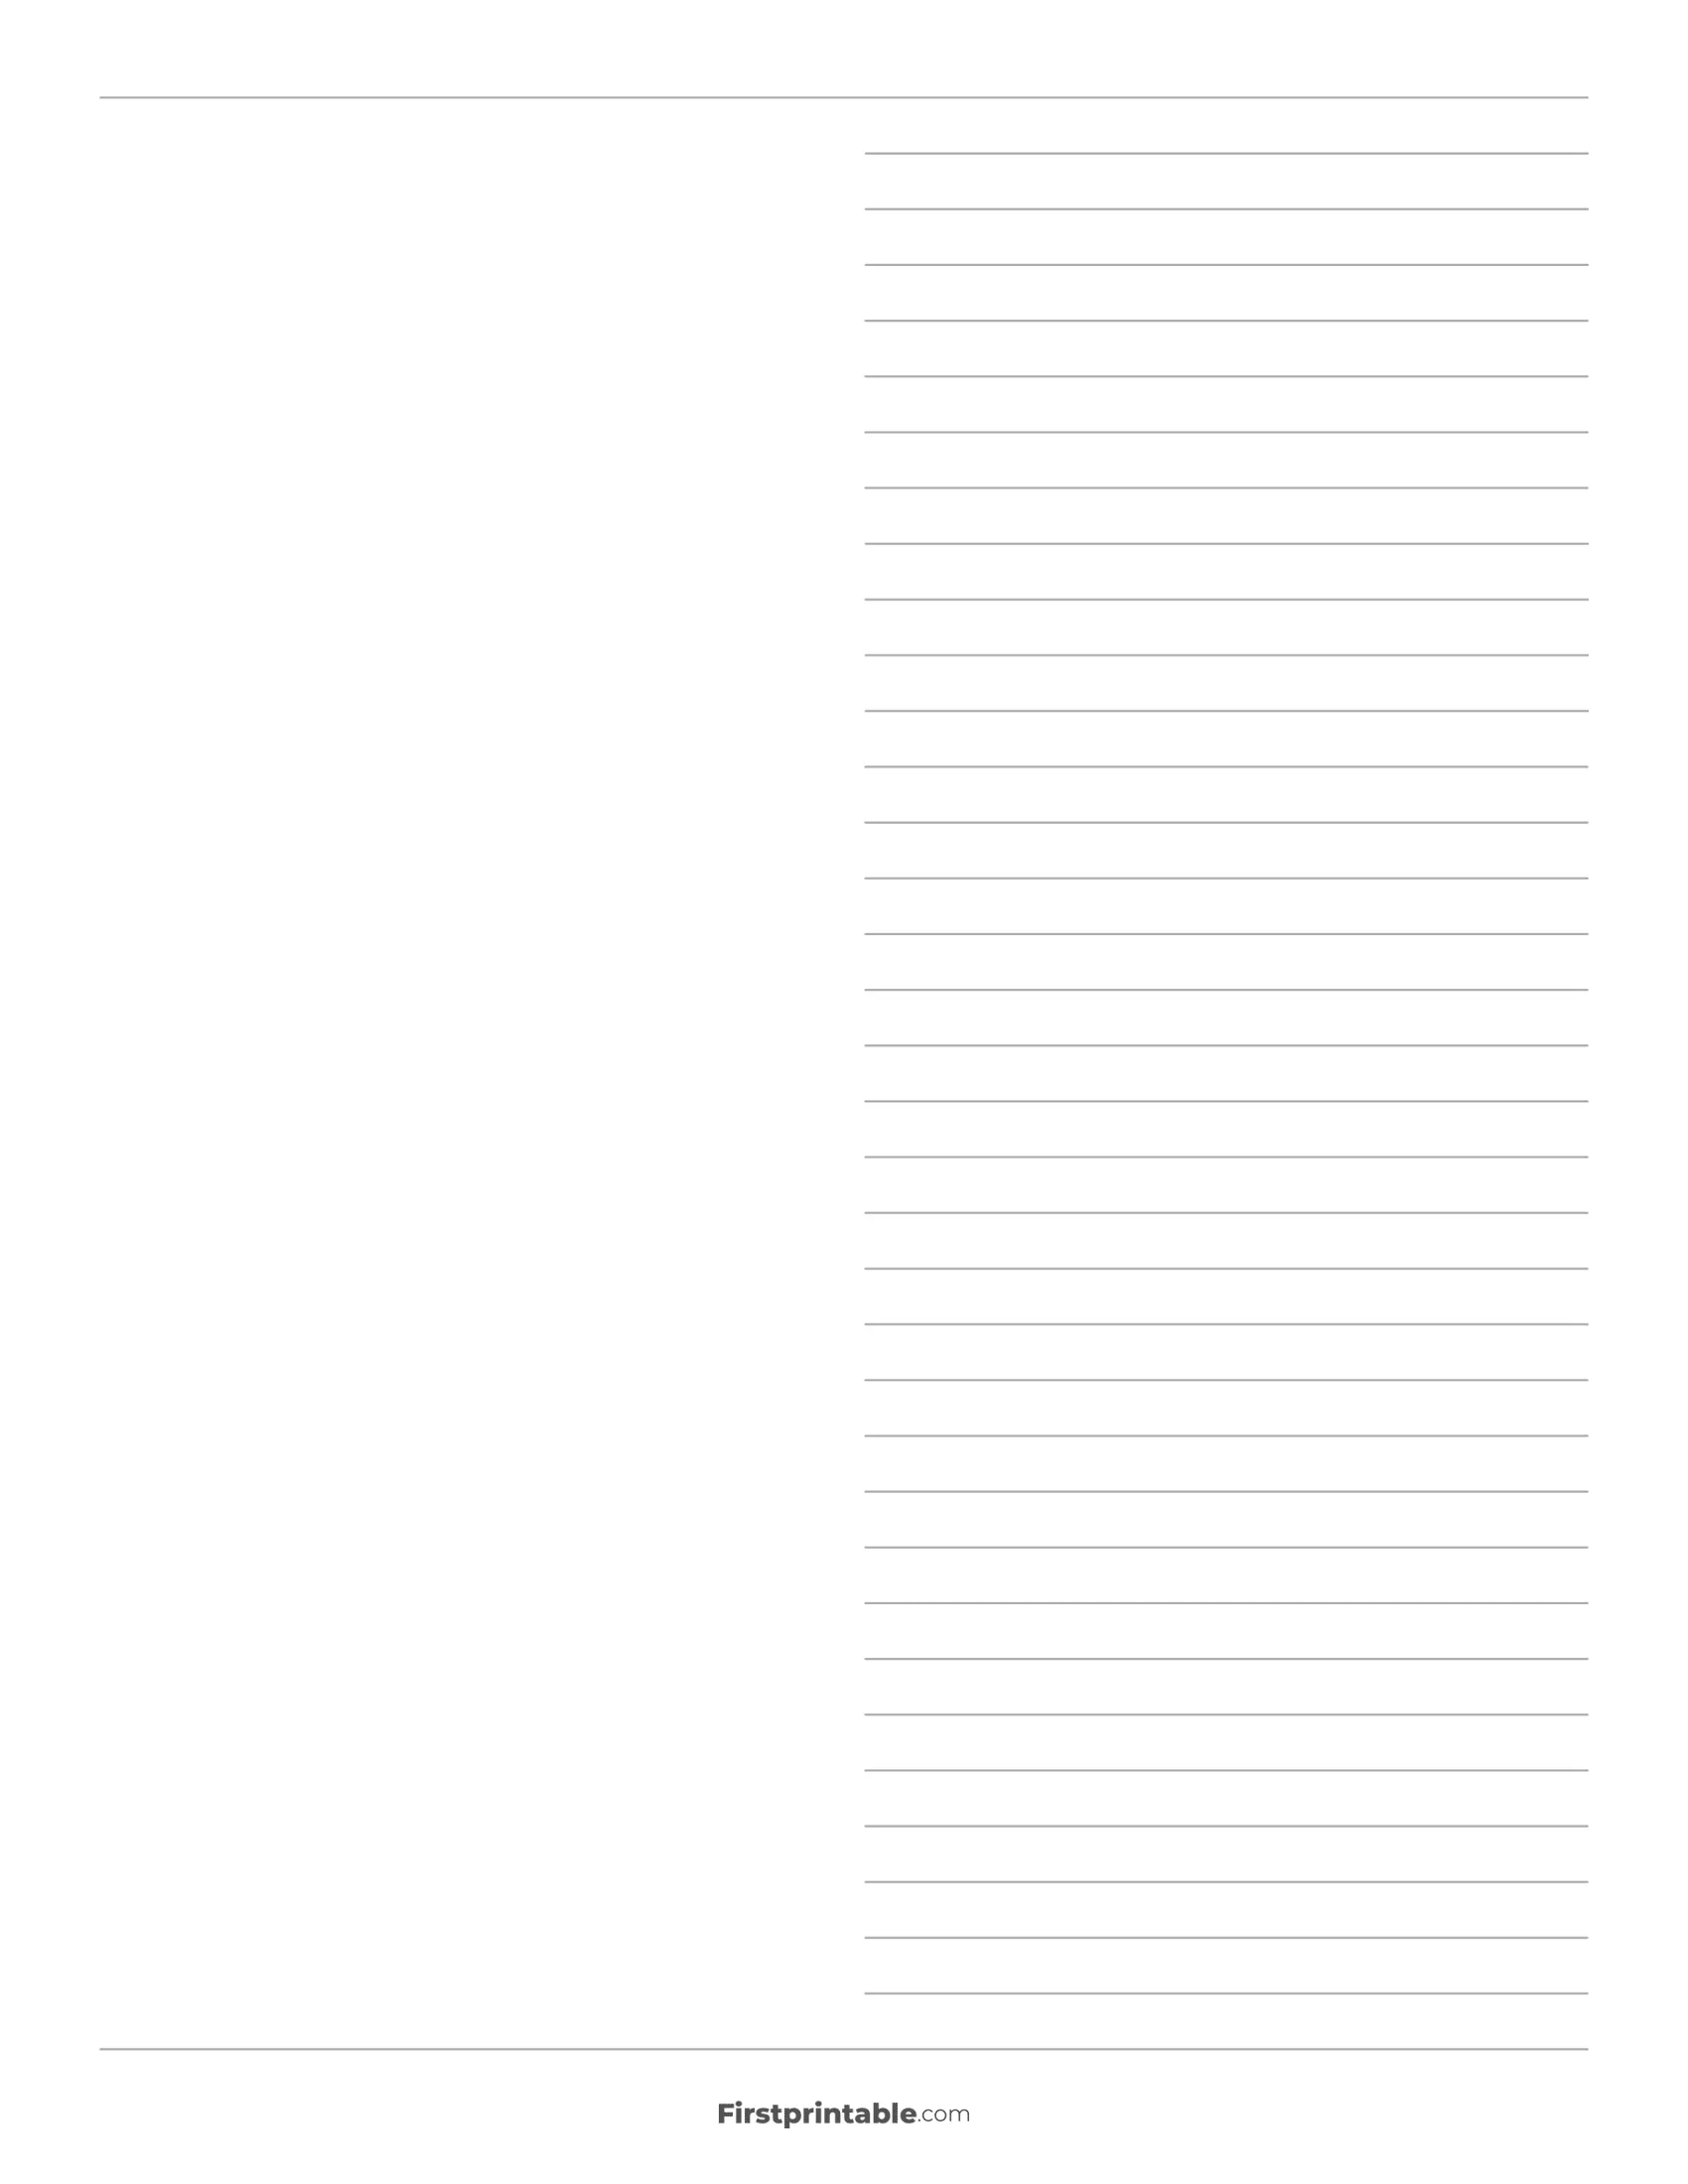 Printable Half Lined Paper - Right